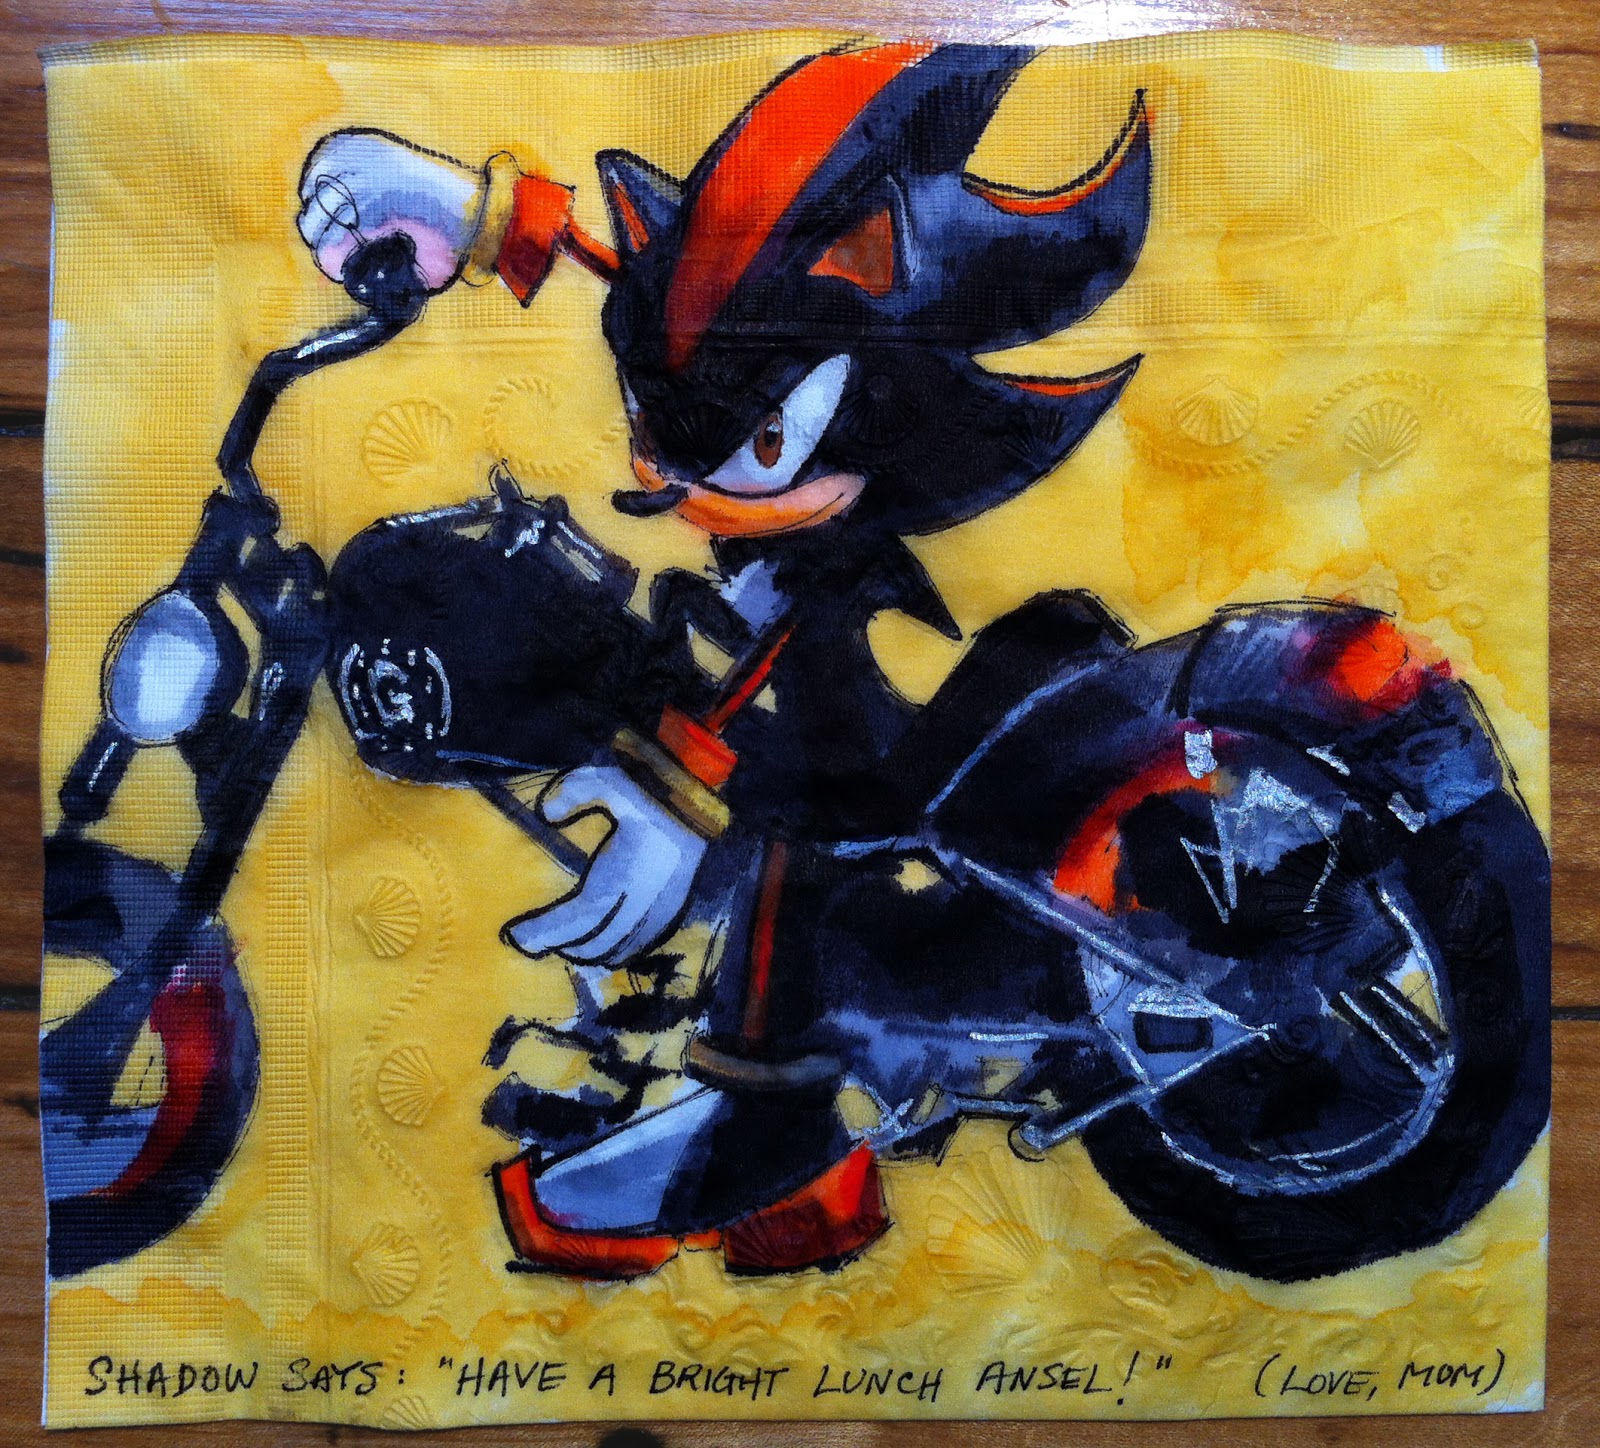 Why does Shadow have a gun? - Shadow the Hedgehog - Giant Bomb